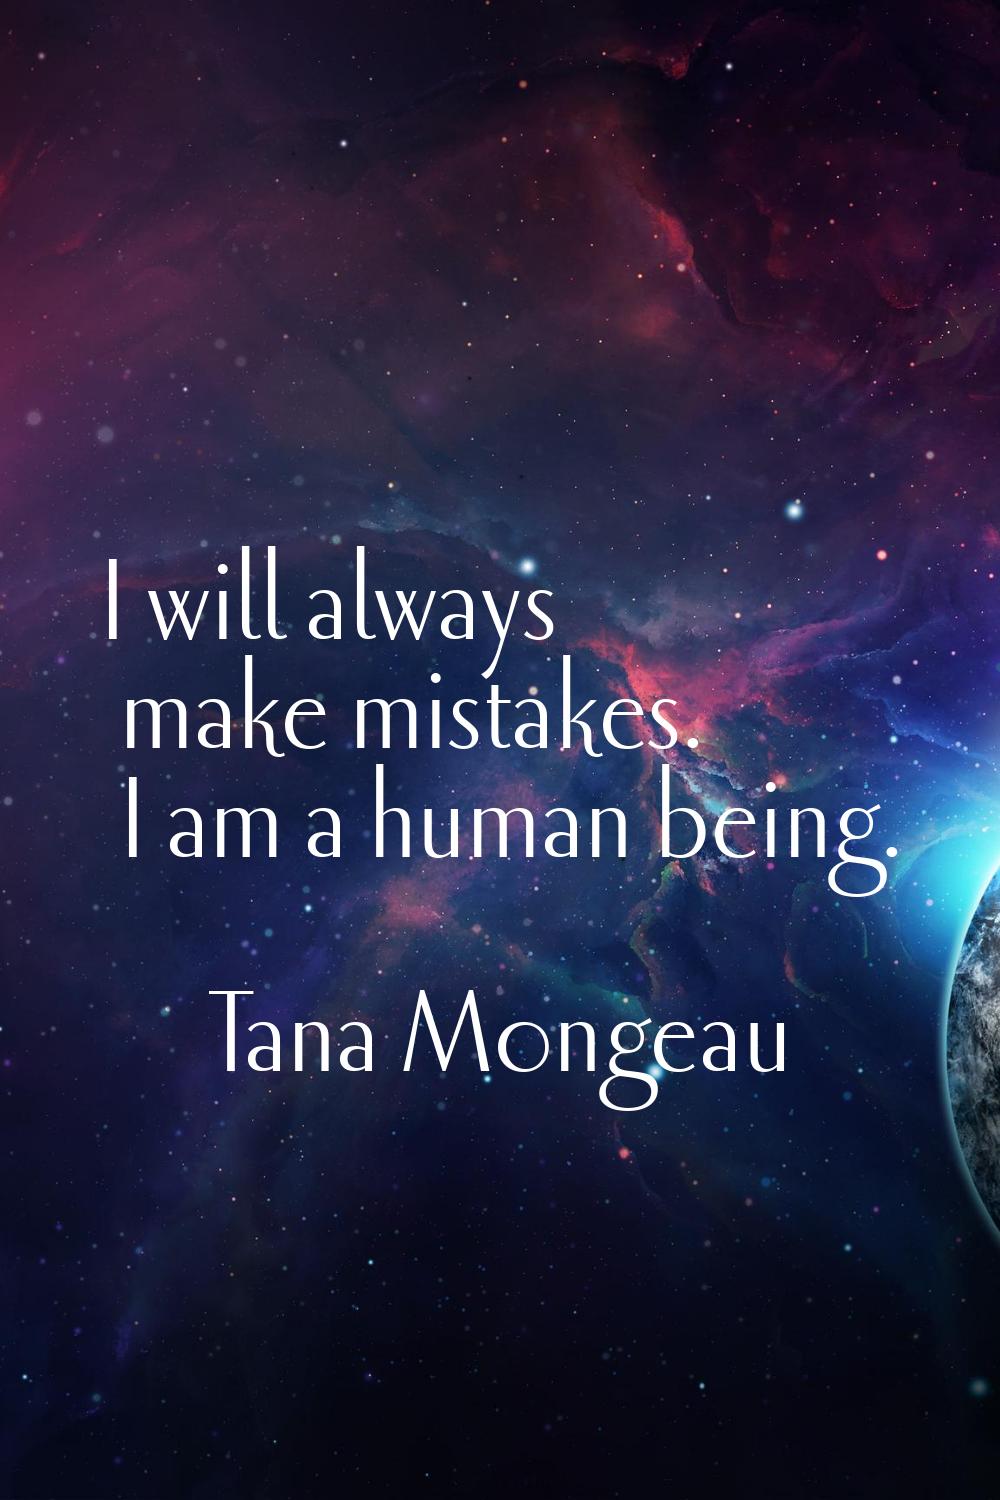 I will always make mistakes. I am a human being.